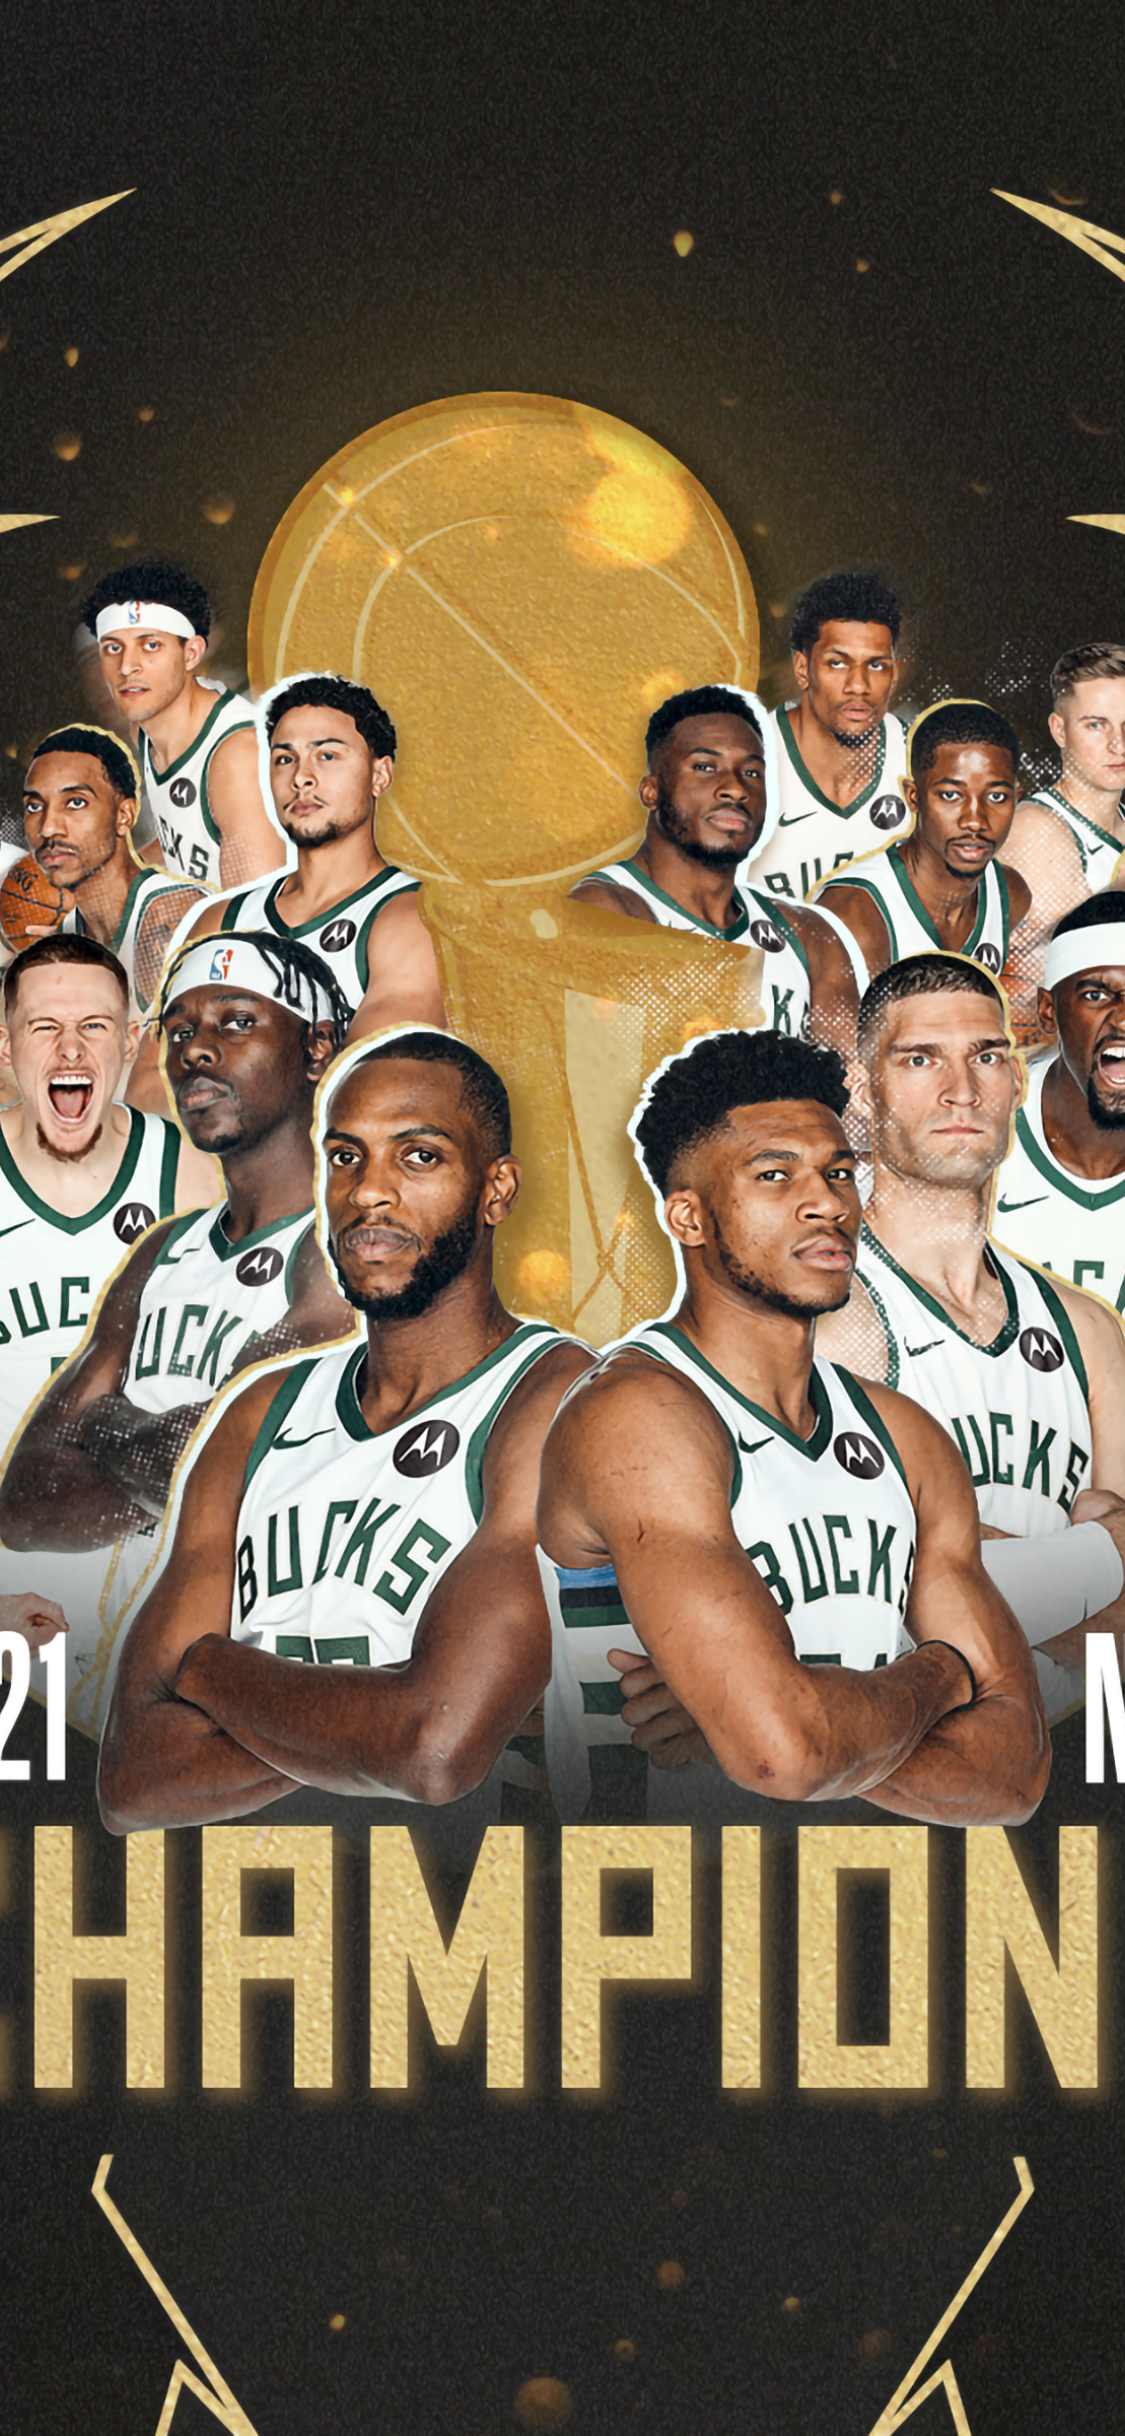 1125x2436 Milwaukee Bucks Nba Champions 21 Iphone Xs Iphone 10 Iphone X Wallpaper Hd Sports 4k Wallpapers Images Photos And Background Wallpapers Den